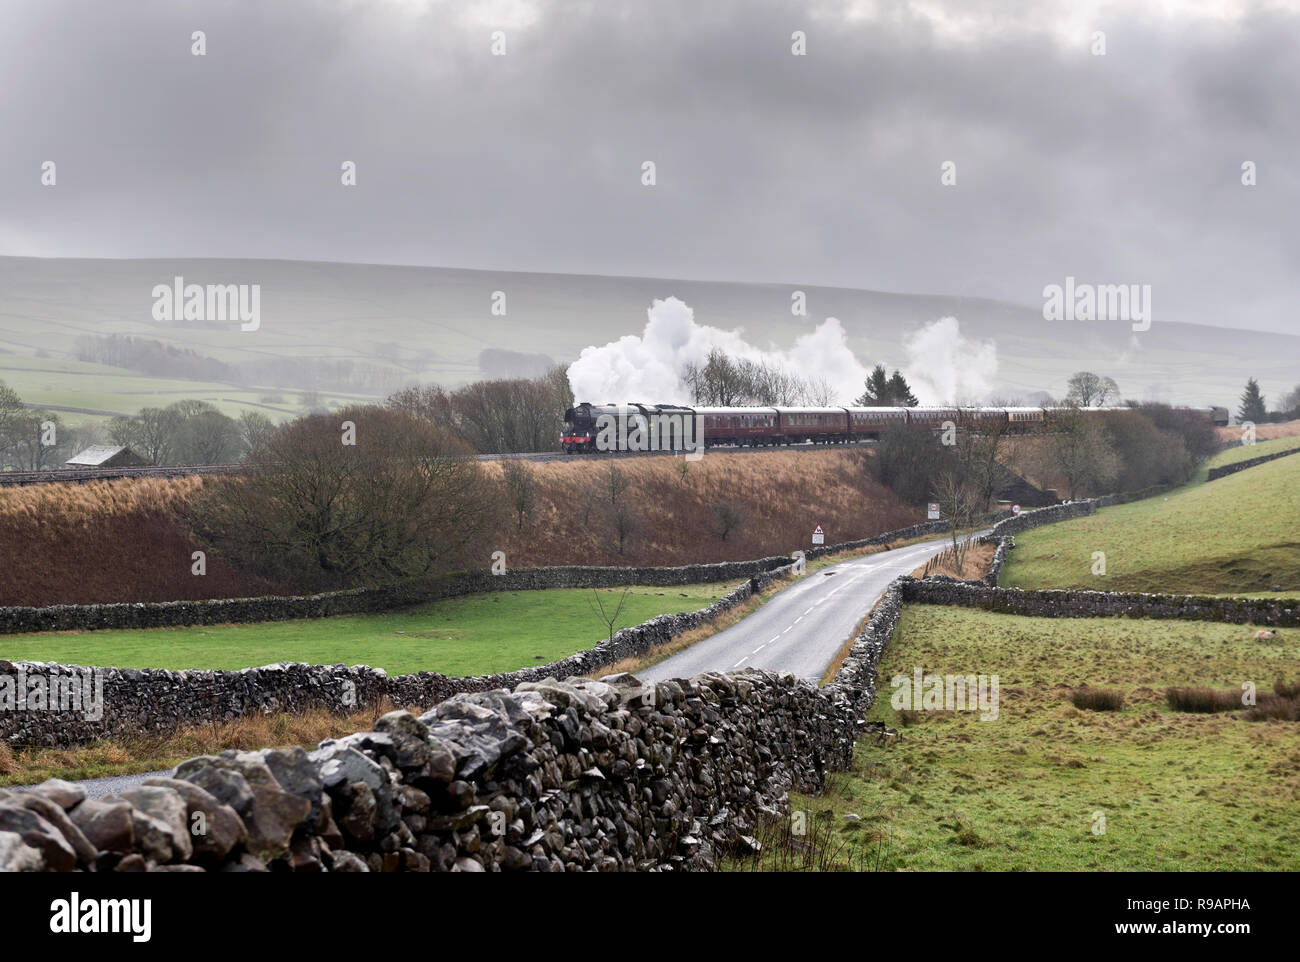 Horton-in-Ribblesdale, North Yorkshire, UK. 22nd December, 2018. Through squally rain The Flying Scotsman steam locomotive hauls the 'Christmas Dalesman' on a round trip from Manchester. Travelling on the famous Settle-Carlisle railway line, the train is seen here at Horton-in-Ribblesdale in the Yorkshire Dales National Park, on its way to Carlisle. Credit: John Bentley/Alamy Live News Stock Photo